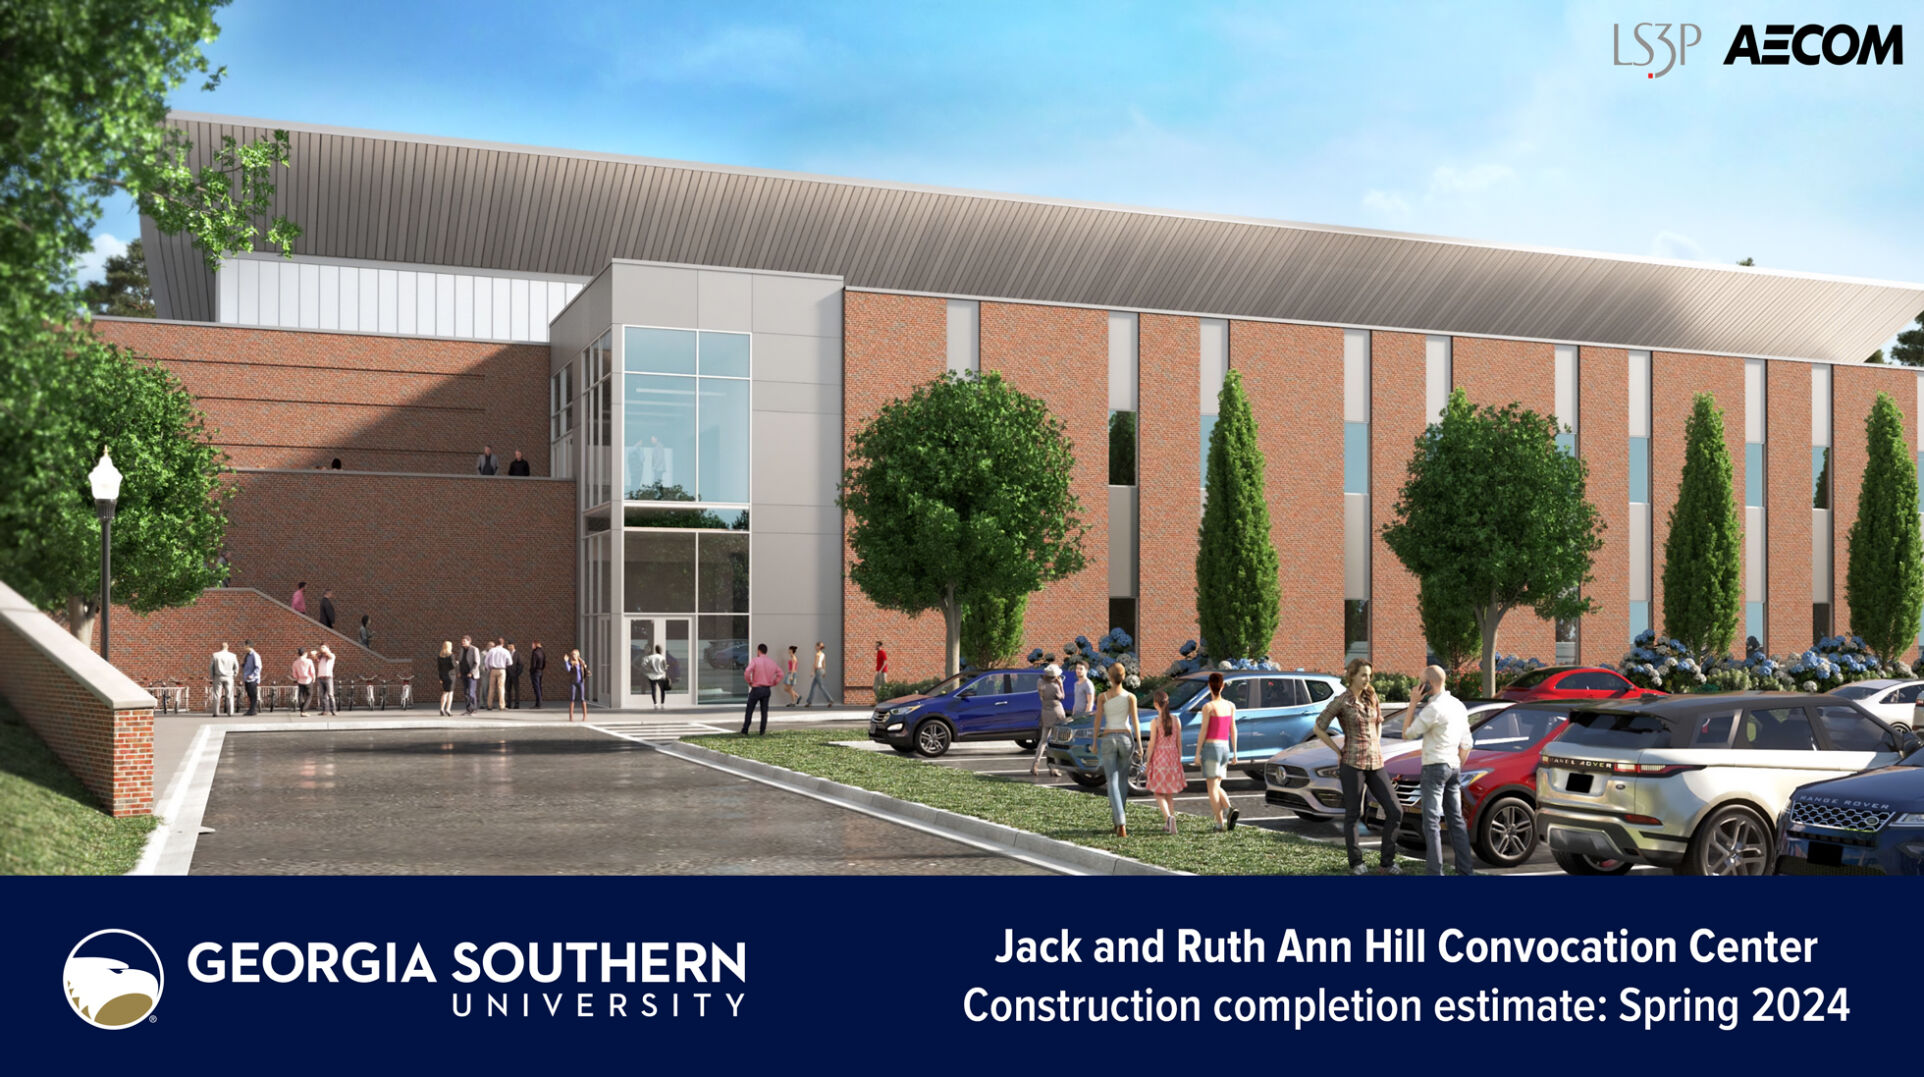 May 10 - Details finalized for new Jack and Ruth Ann Hill Convocation  Center at Georgia Southern | Economic Development |  savannahbusinessjournal.com